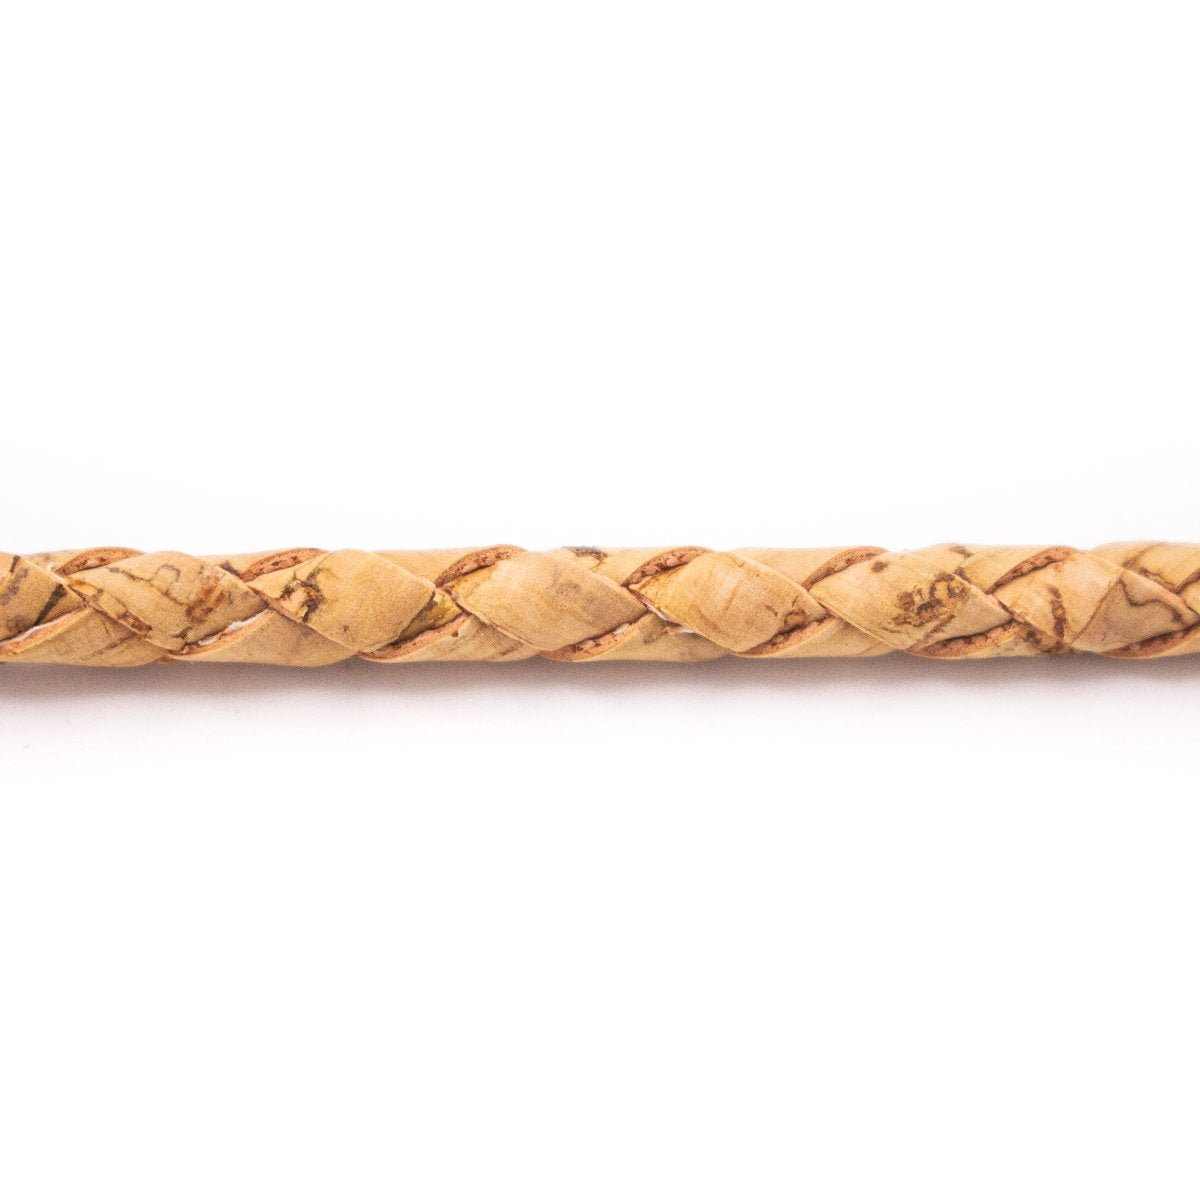 10 meters of Braided 5mm Round Natural Cork Cord COR-545